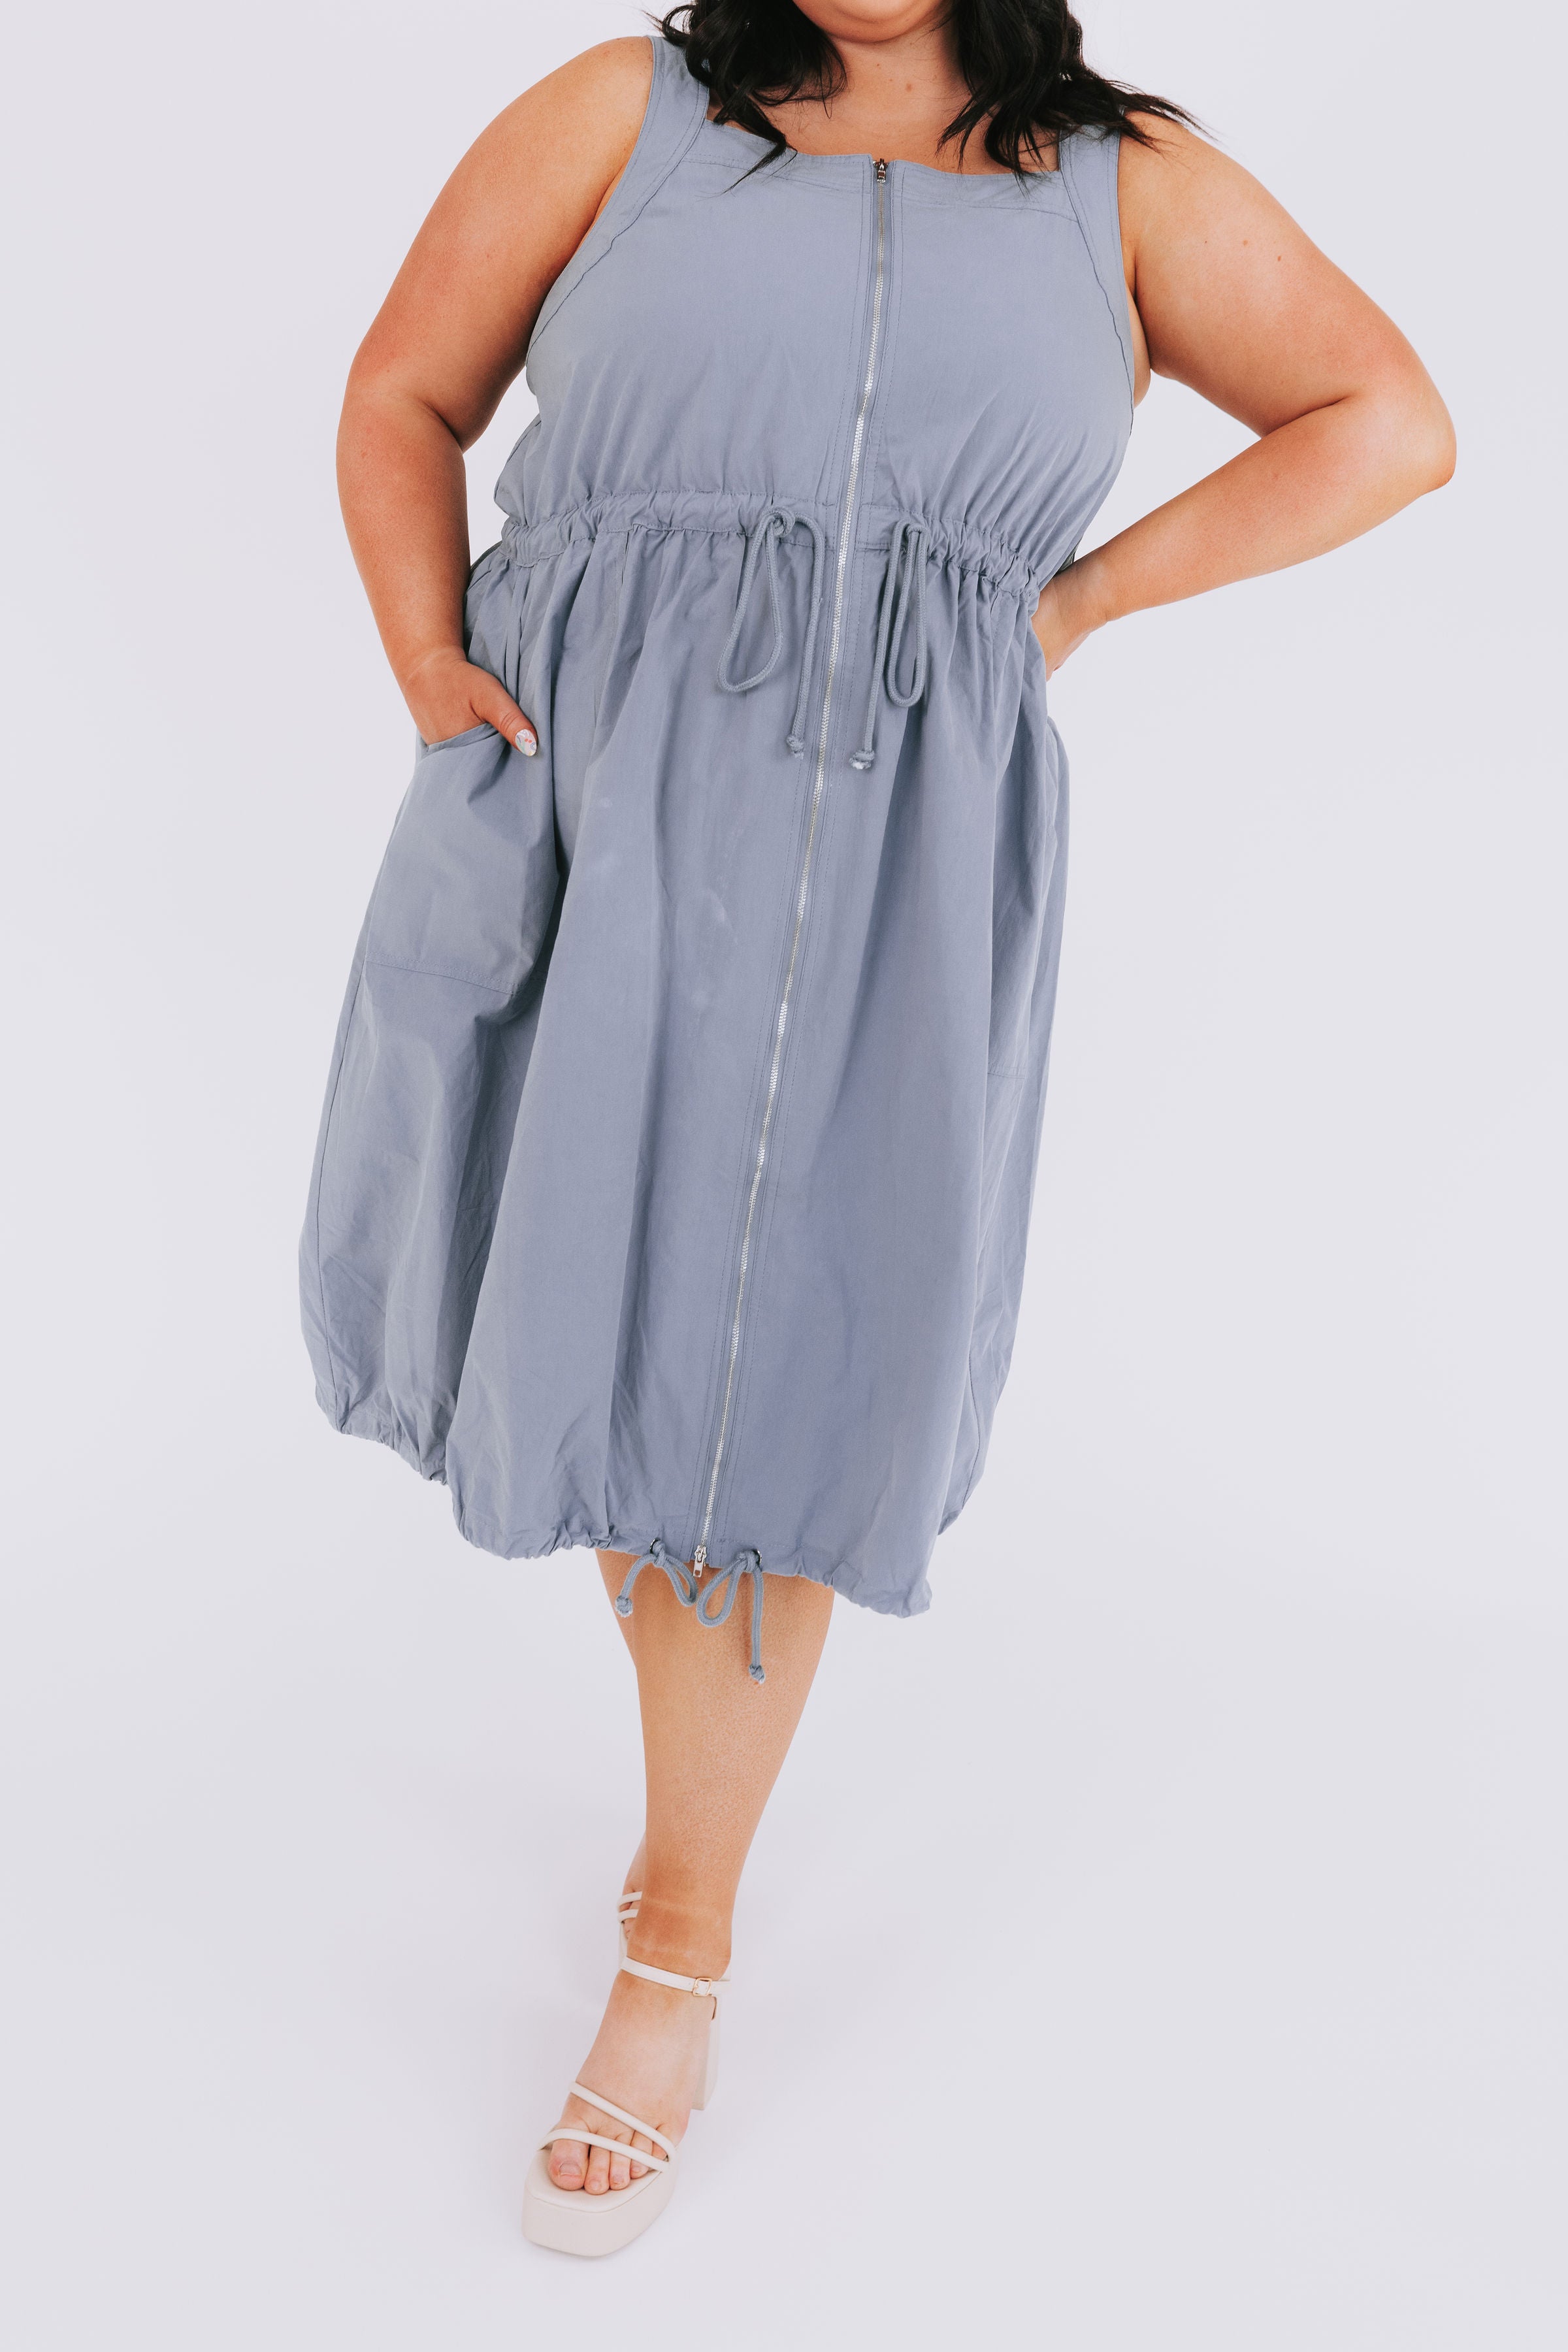 PLUS SIZE - All The Way Dress